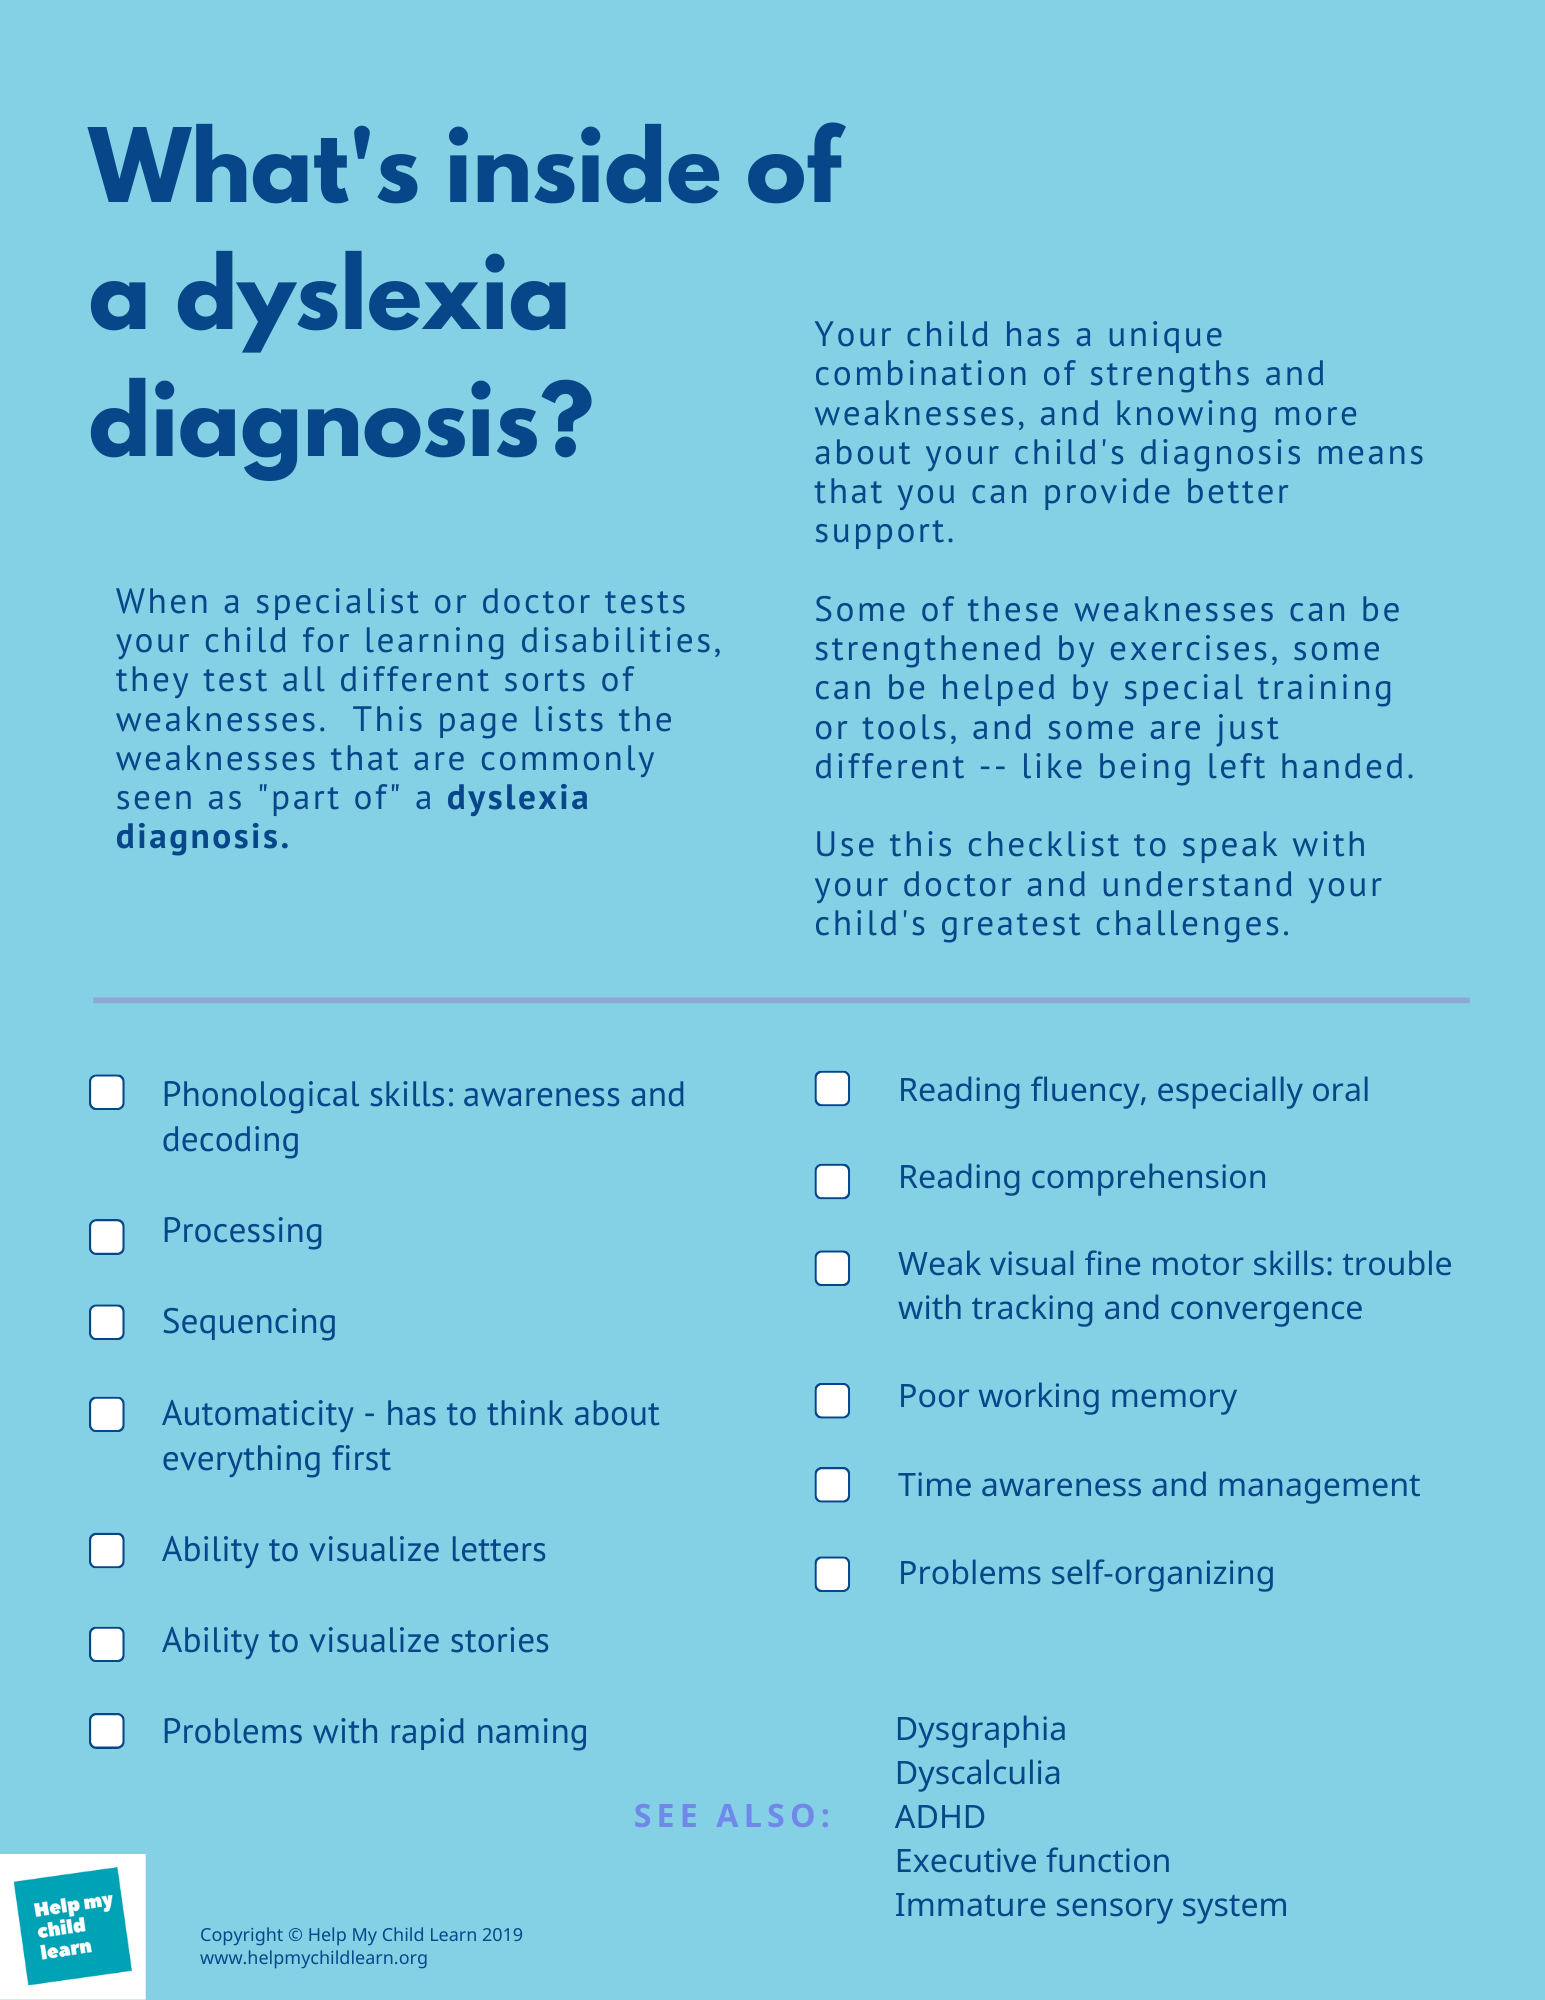 what's inside your child's dyslexia diagnosis?